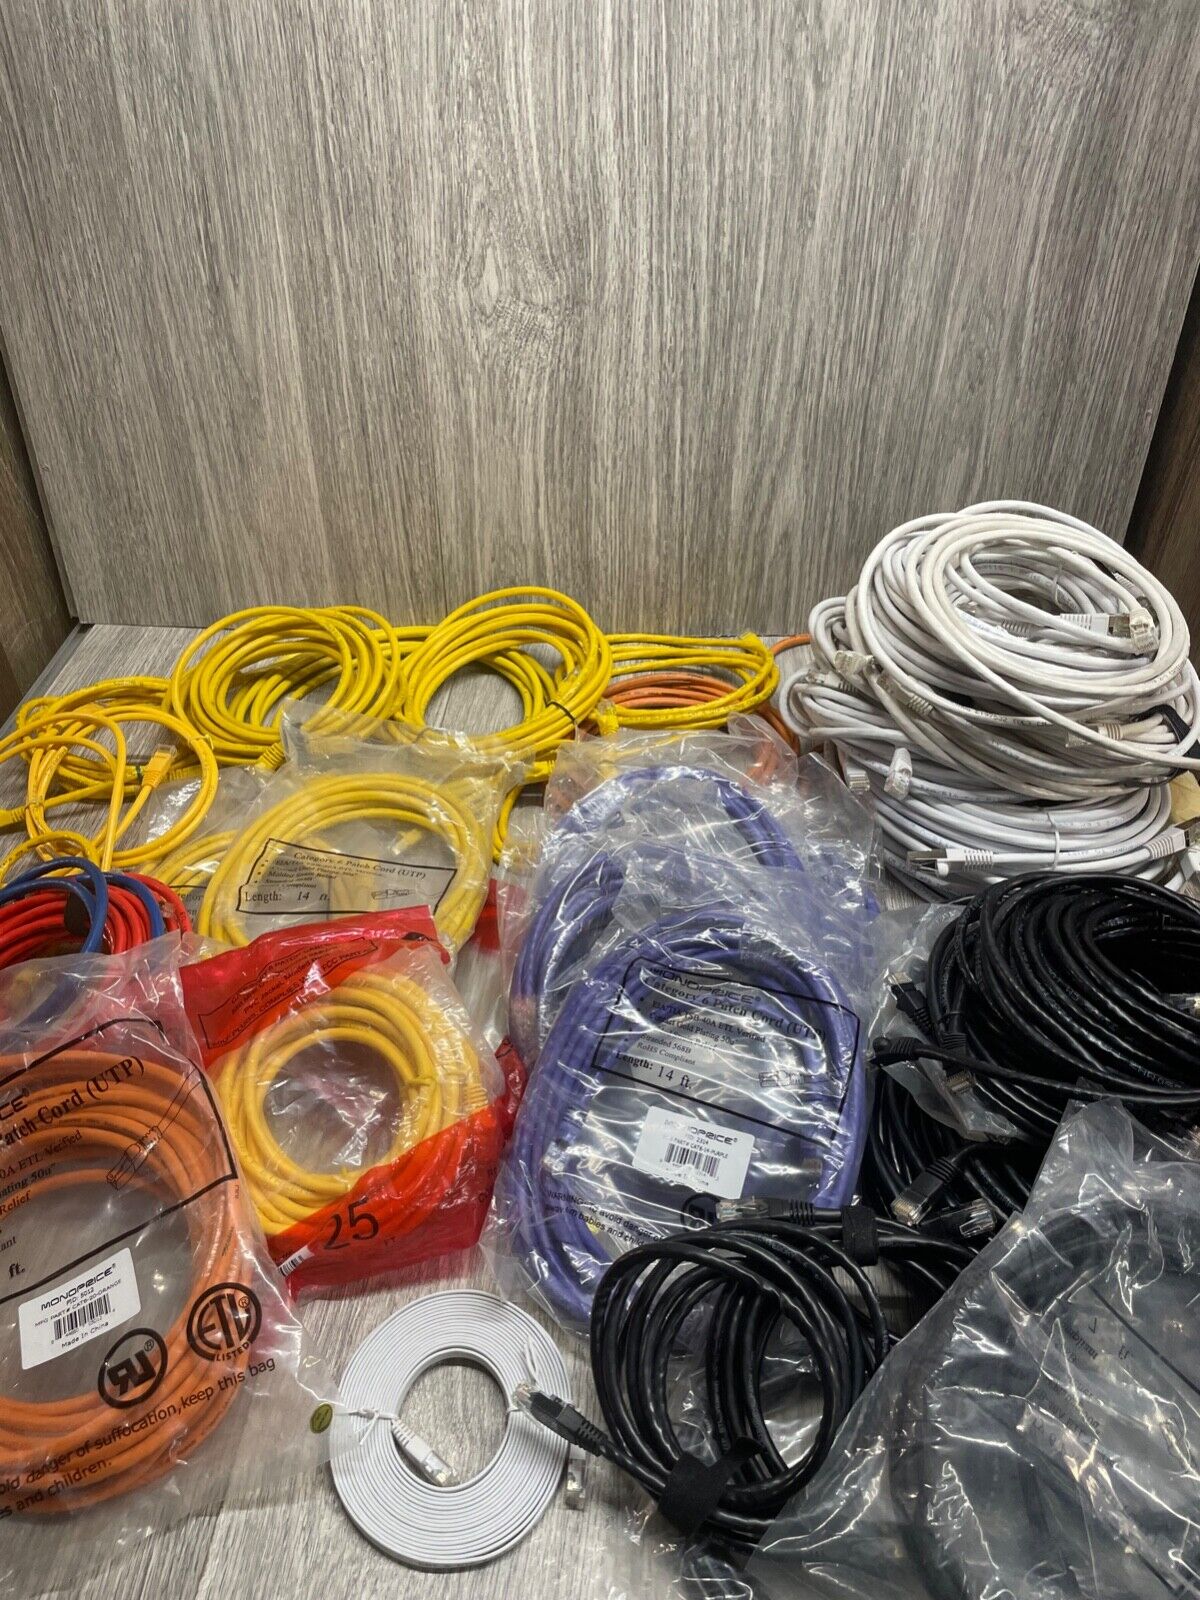 Cat 6 Huge lot of 55 used and New Ethernet USB Cables 3 ft to 25 ft Shaxon Monop